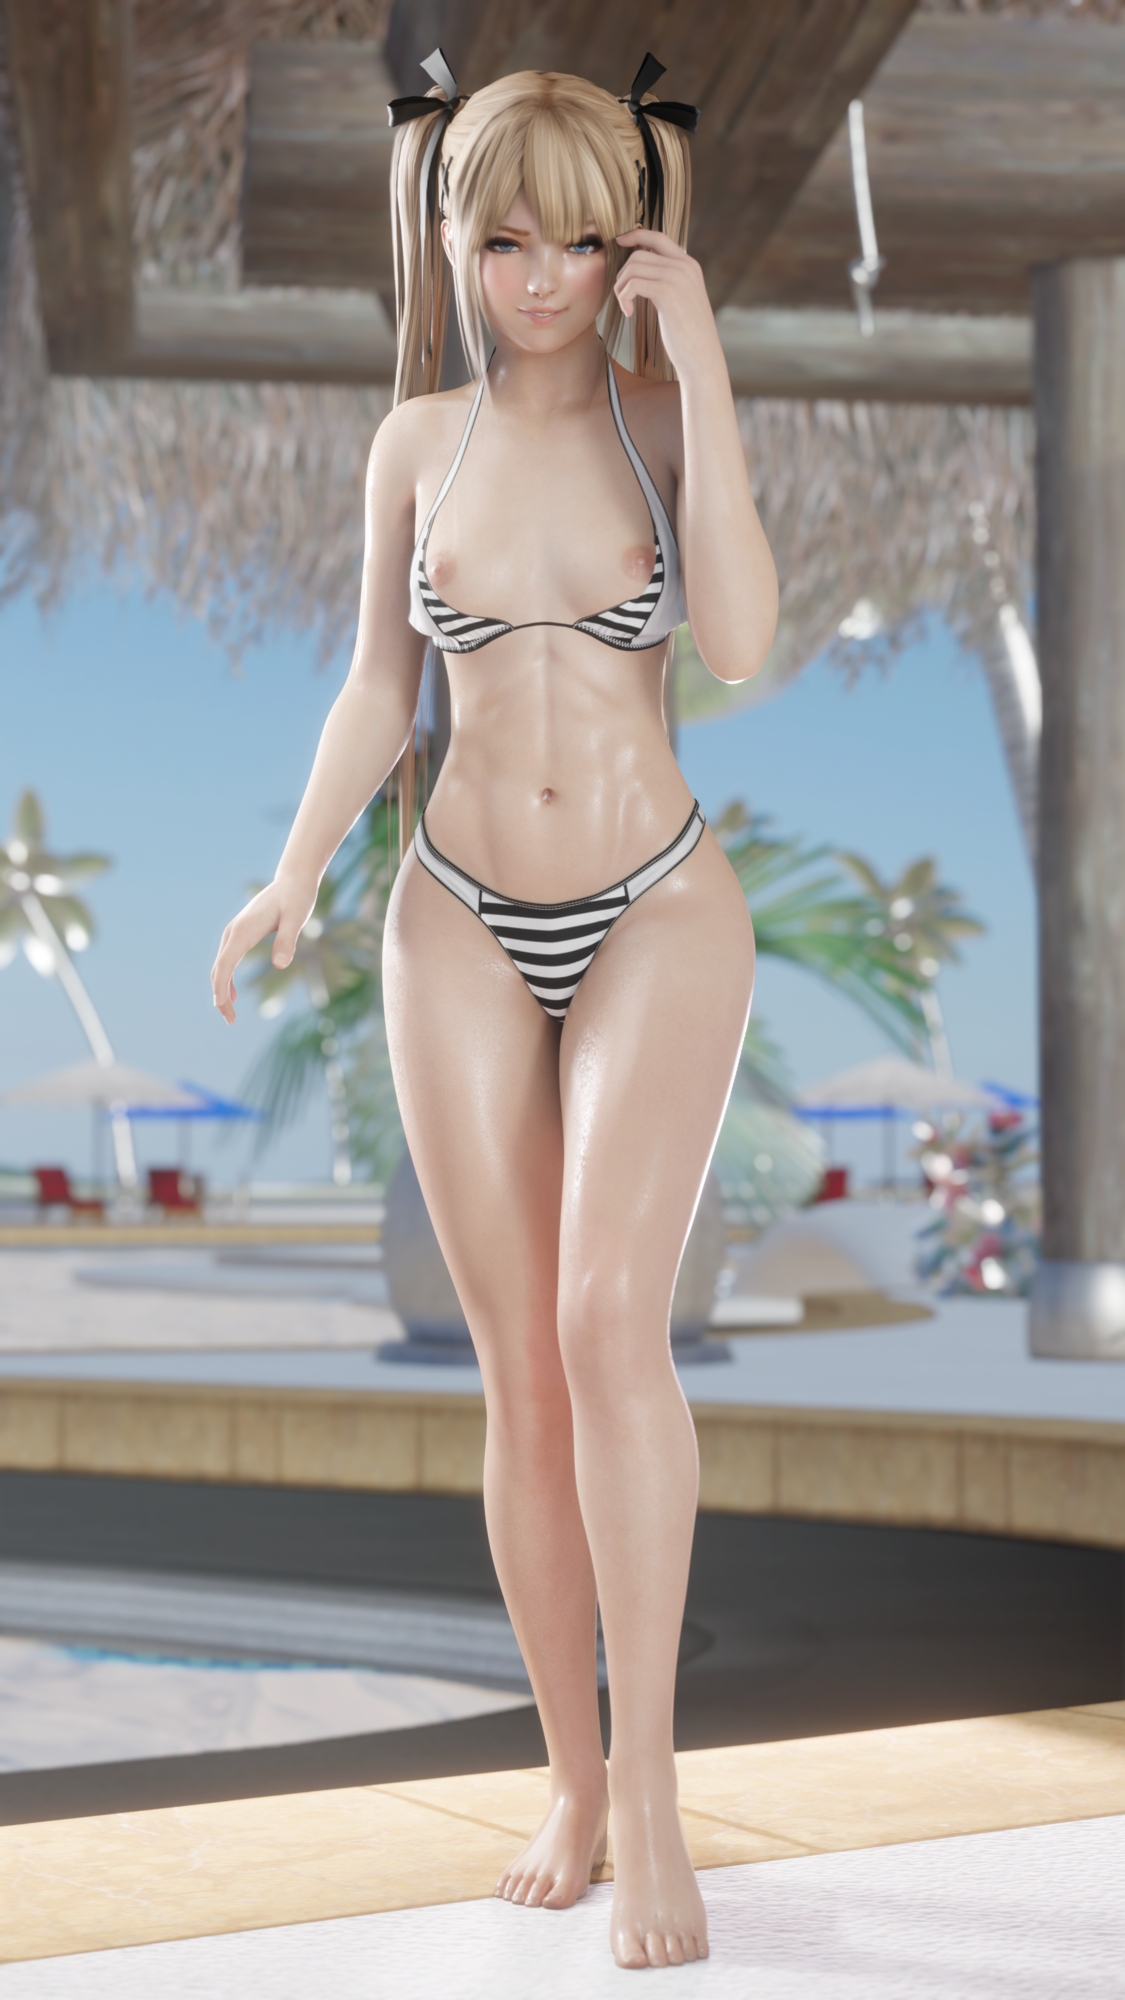 Marie Rose at the pool. Marie Rose Dead Or Alive Looking At Viewer Sexy Posing 3